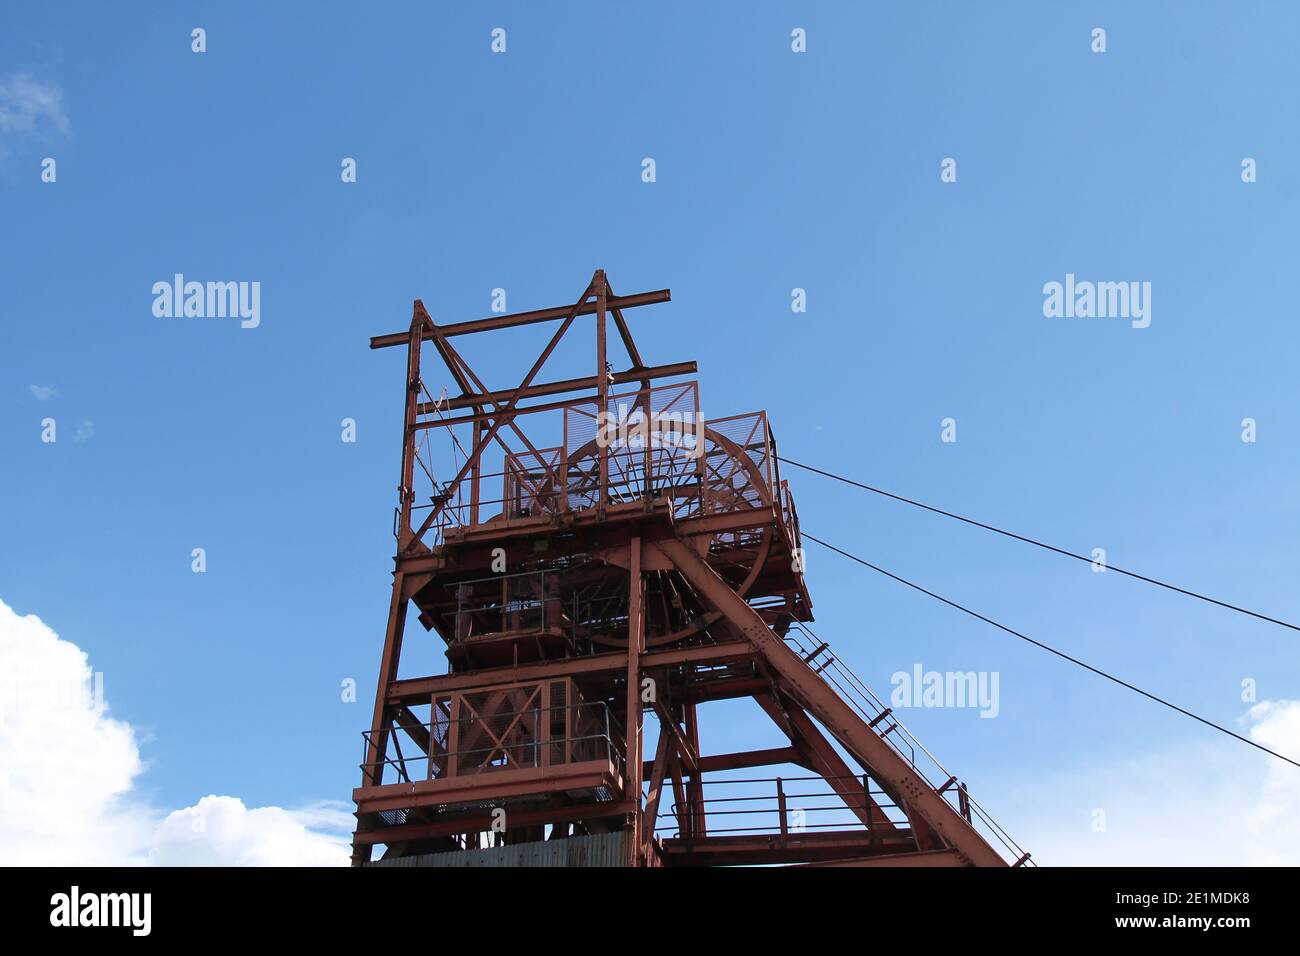 The Classic Winding Headstocks of a Coal Mine Pit. Stock Photo